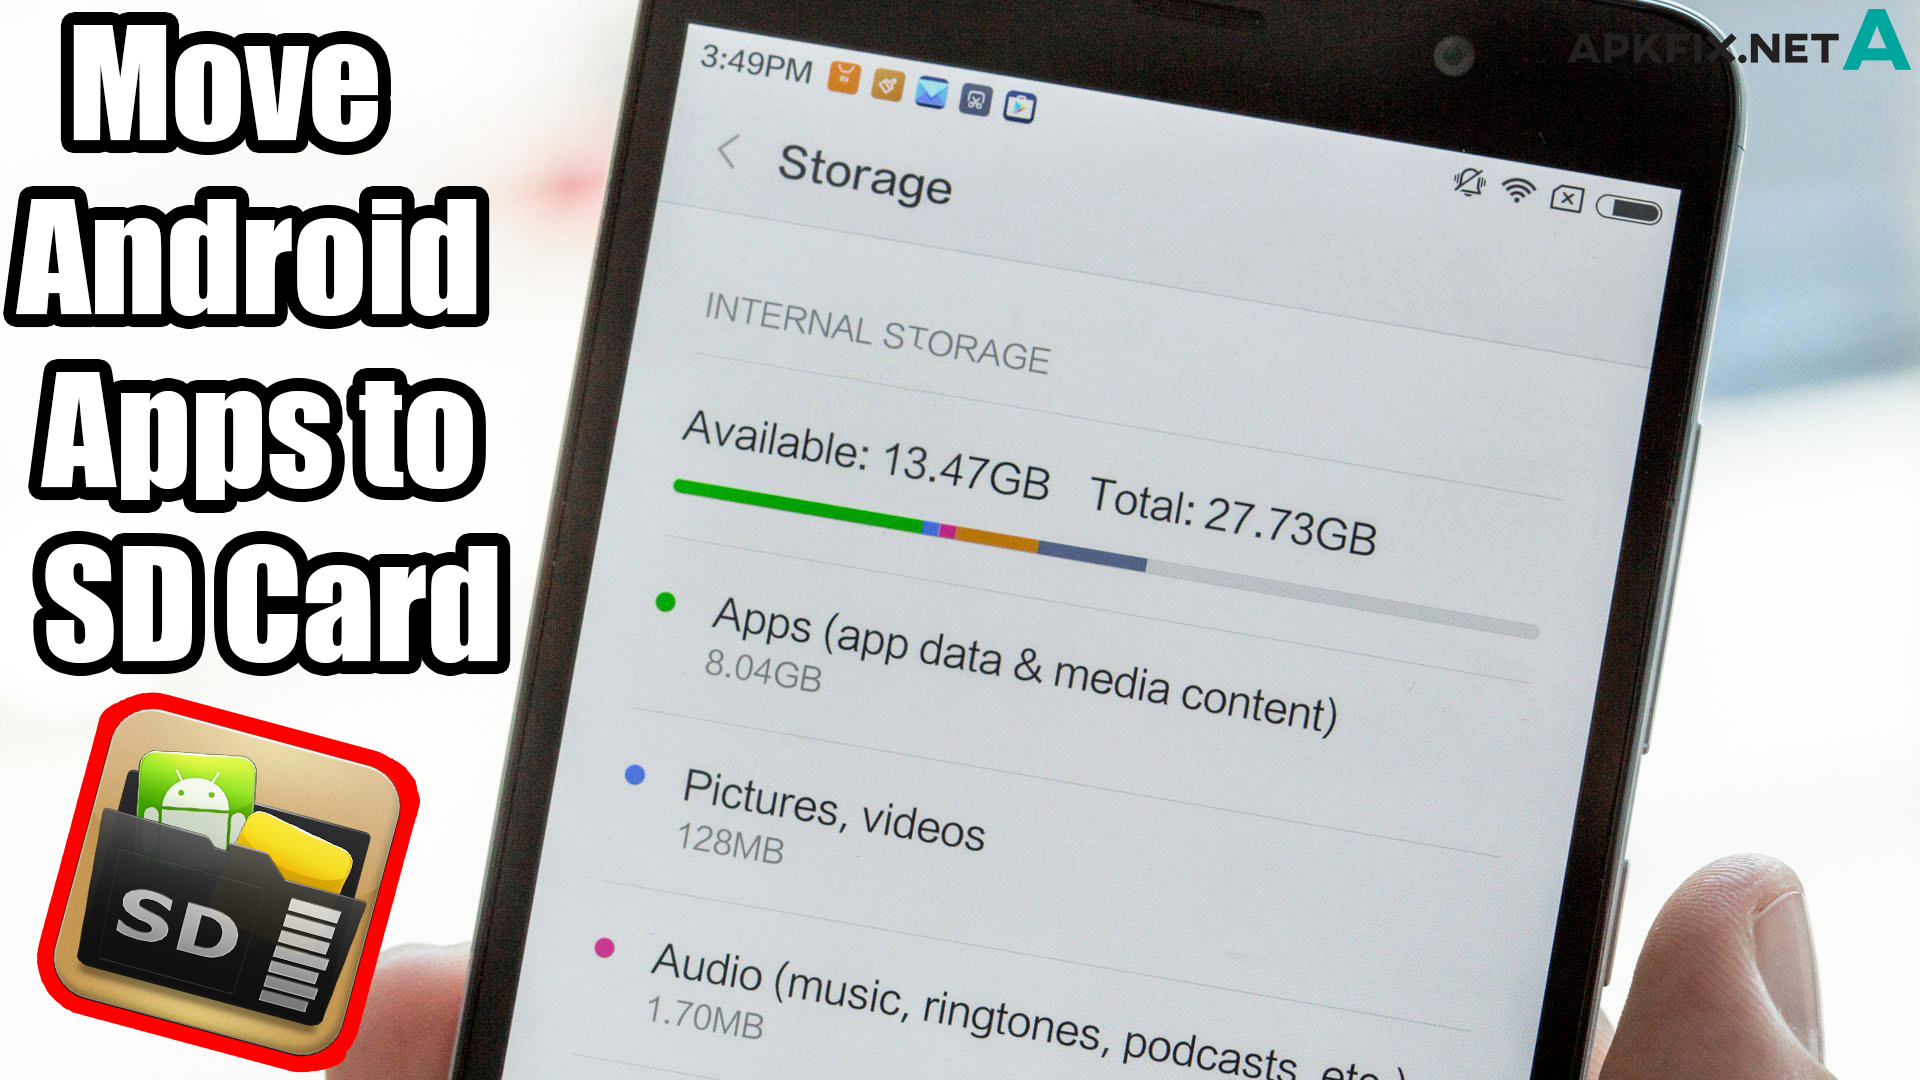 How To Move All Android Apps To An SD Card - APK Fix